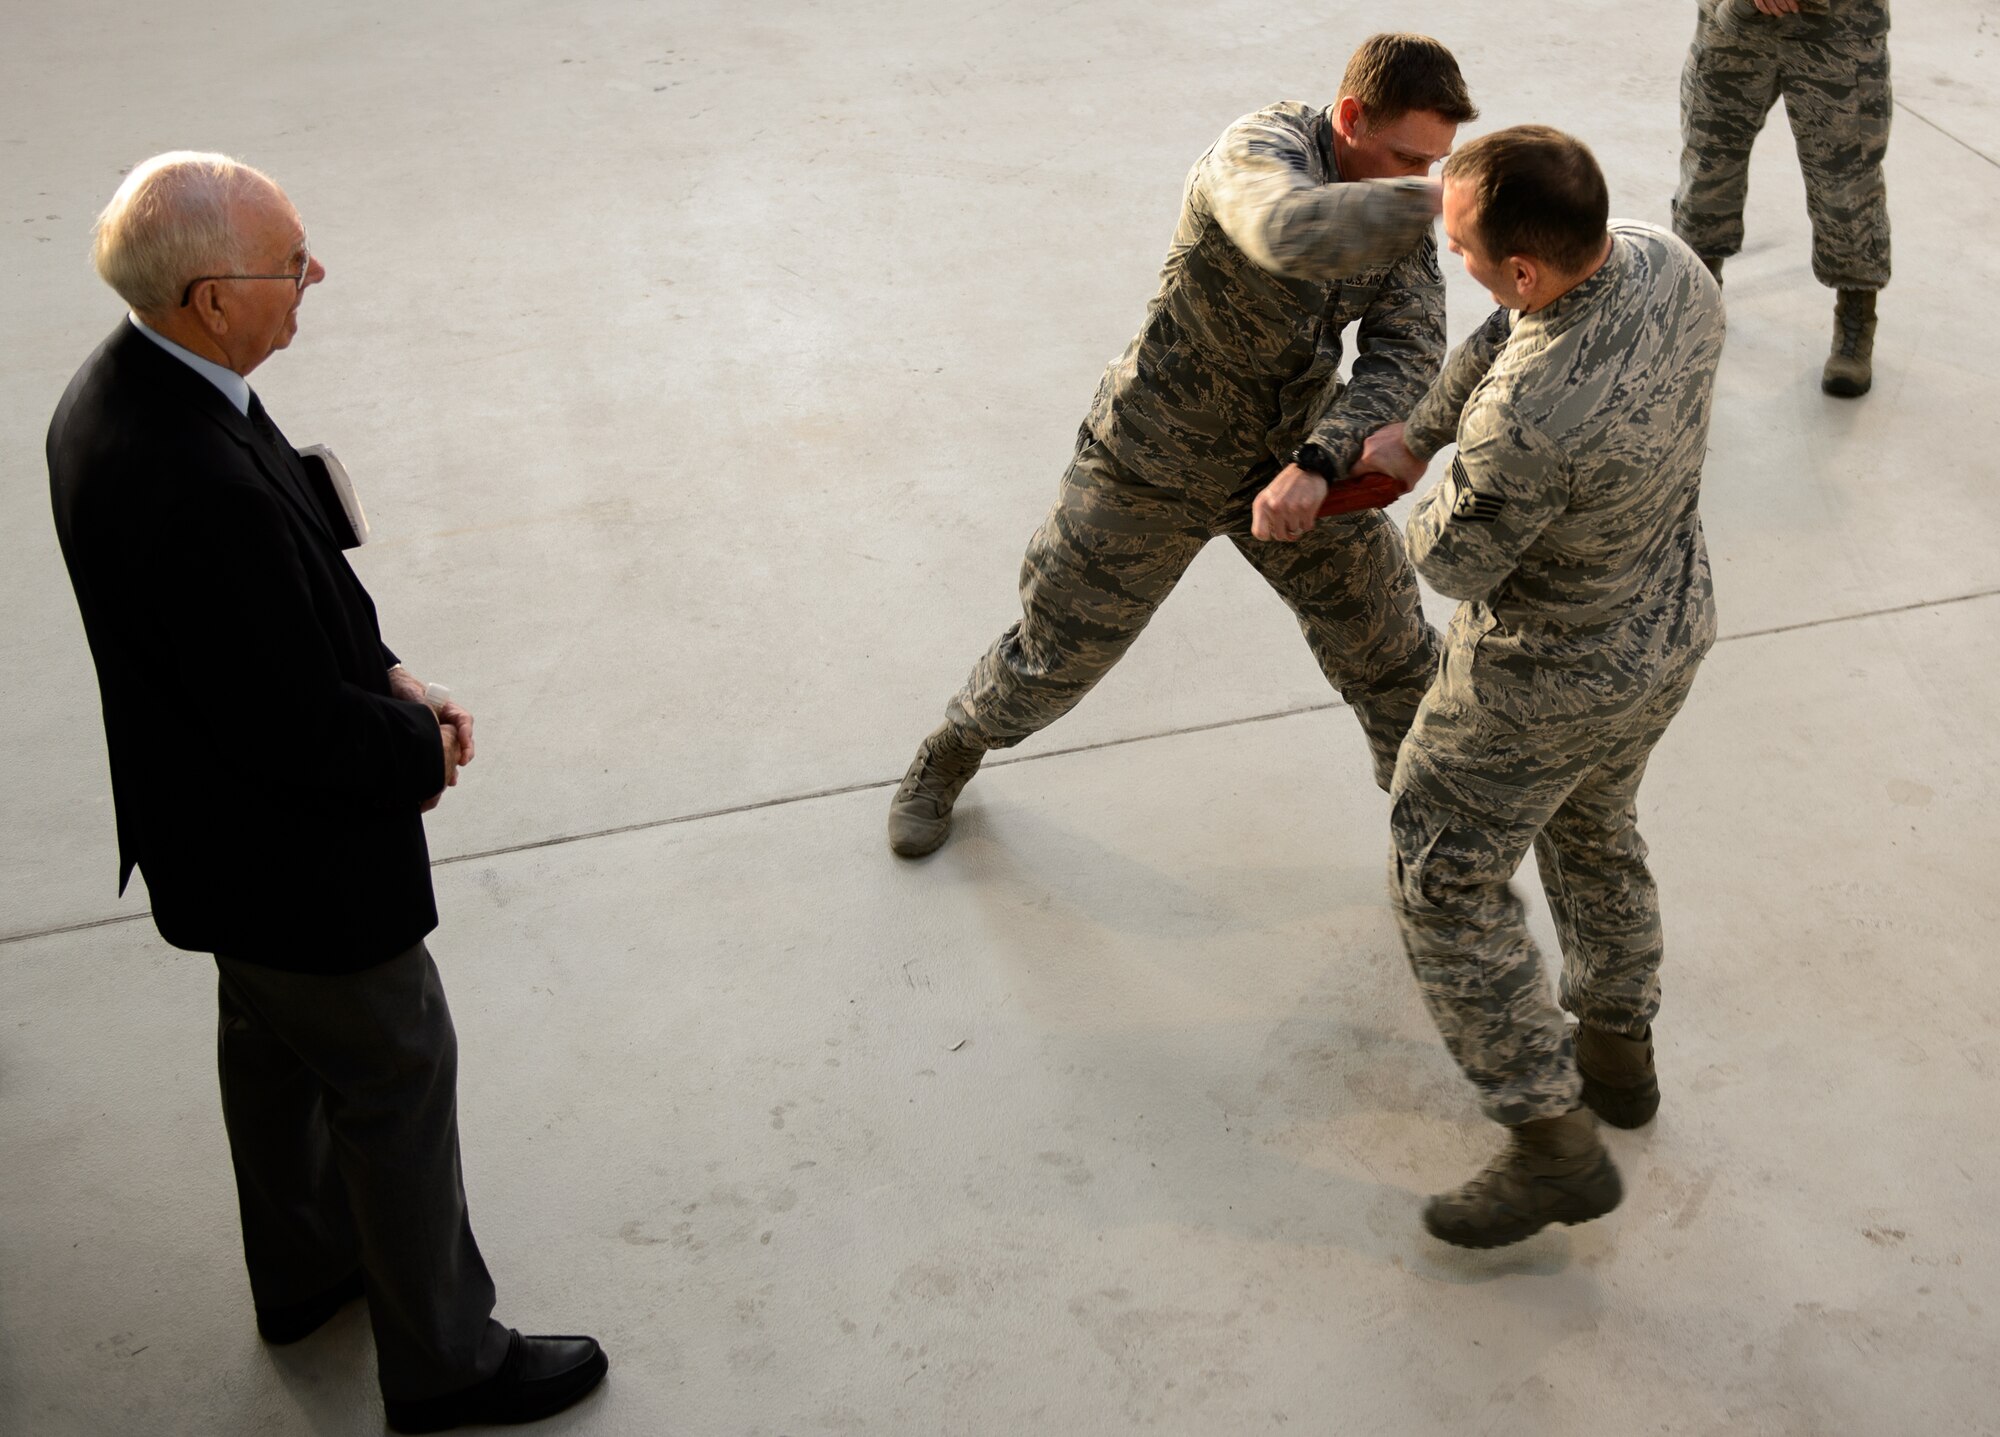 Sam E. Parish, retired Chief Master Sergeant of the Air Force, watches as two Airmen from the 435th Security Forces Squadron demonstrate skills taught to their students Jan. 26, 2016 at Ramstein Air Base, Germany. Many of the 435th Air Ground Operations Wing units showcased their missions to Parish during his visit to Ramstein. During his visit Parish also learned about the three wings at Ramstein and was the guest speaker at the chief master sergeant’s induction ceremony. (U.S. Air Force photo/Staff Sgt. Armando A. Schwier-Morales)